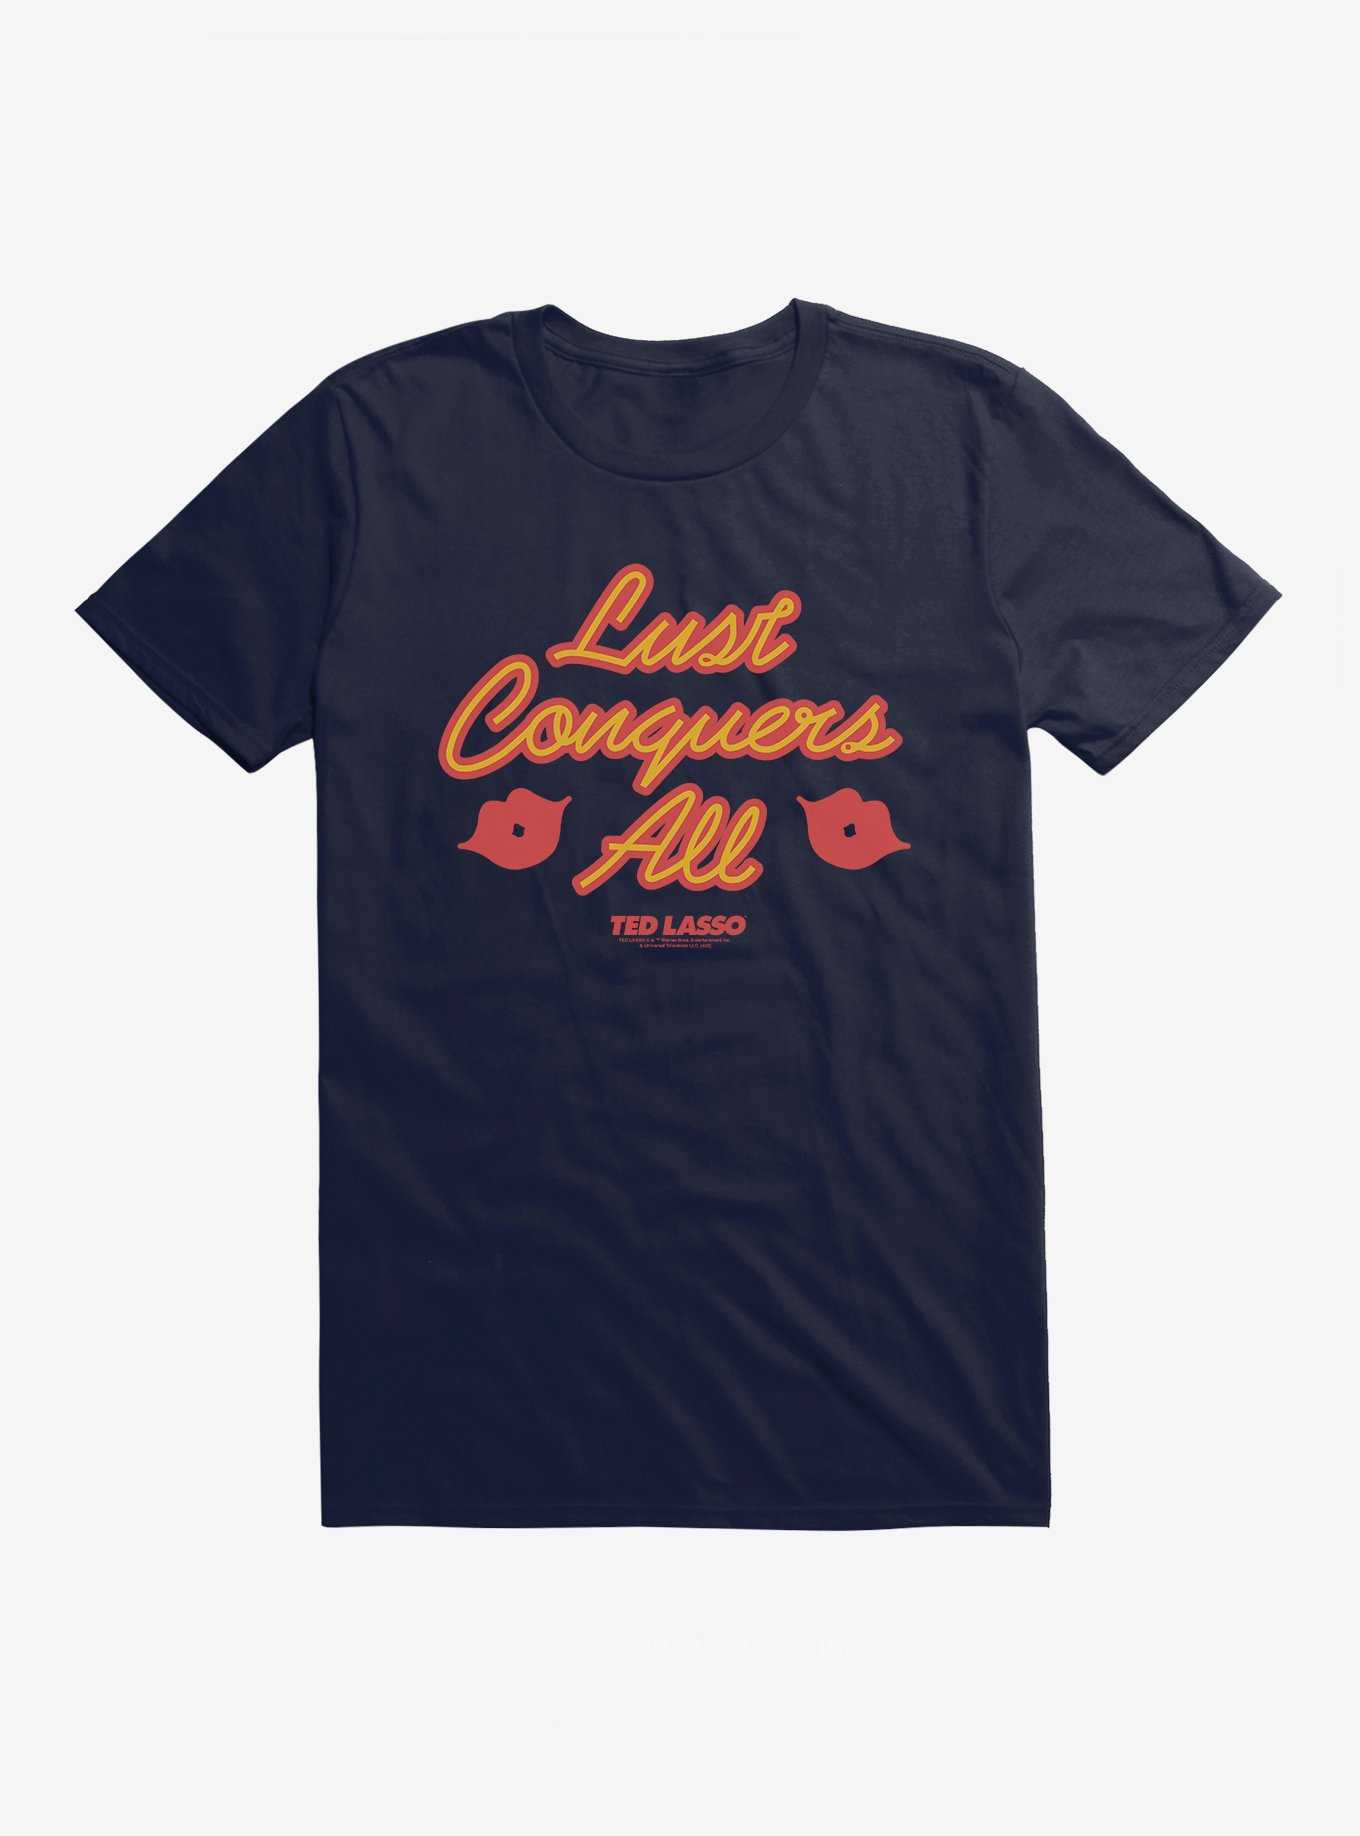 Ted Lasso Lust Conquers All T-Shirt, , hi-res